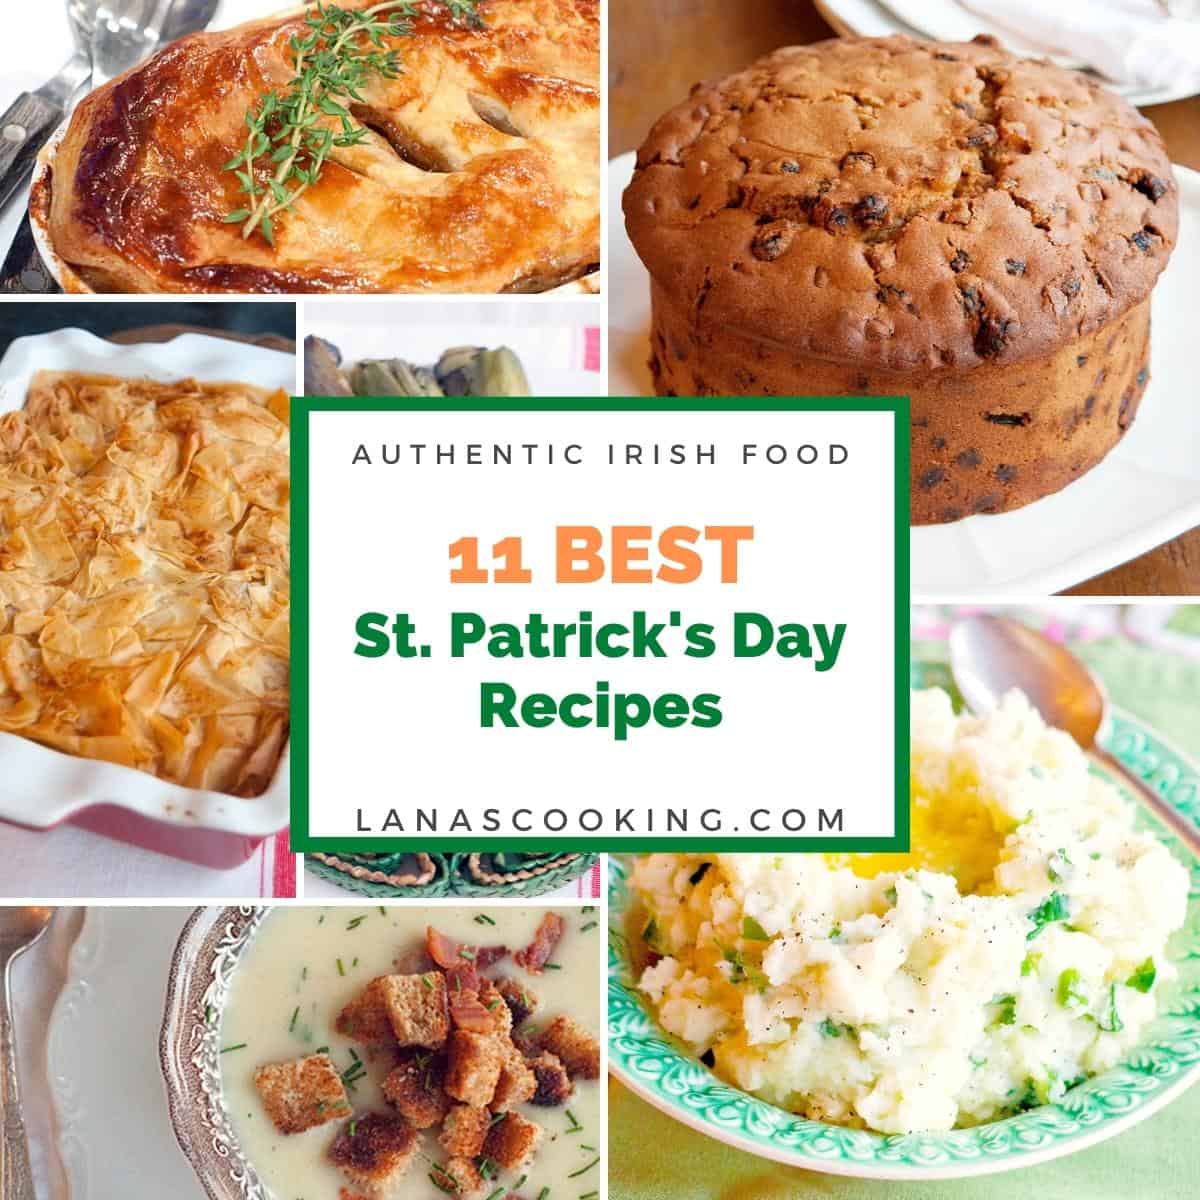 11 Best St. Patrick’s Day Recipes